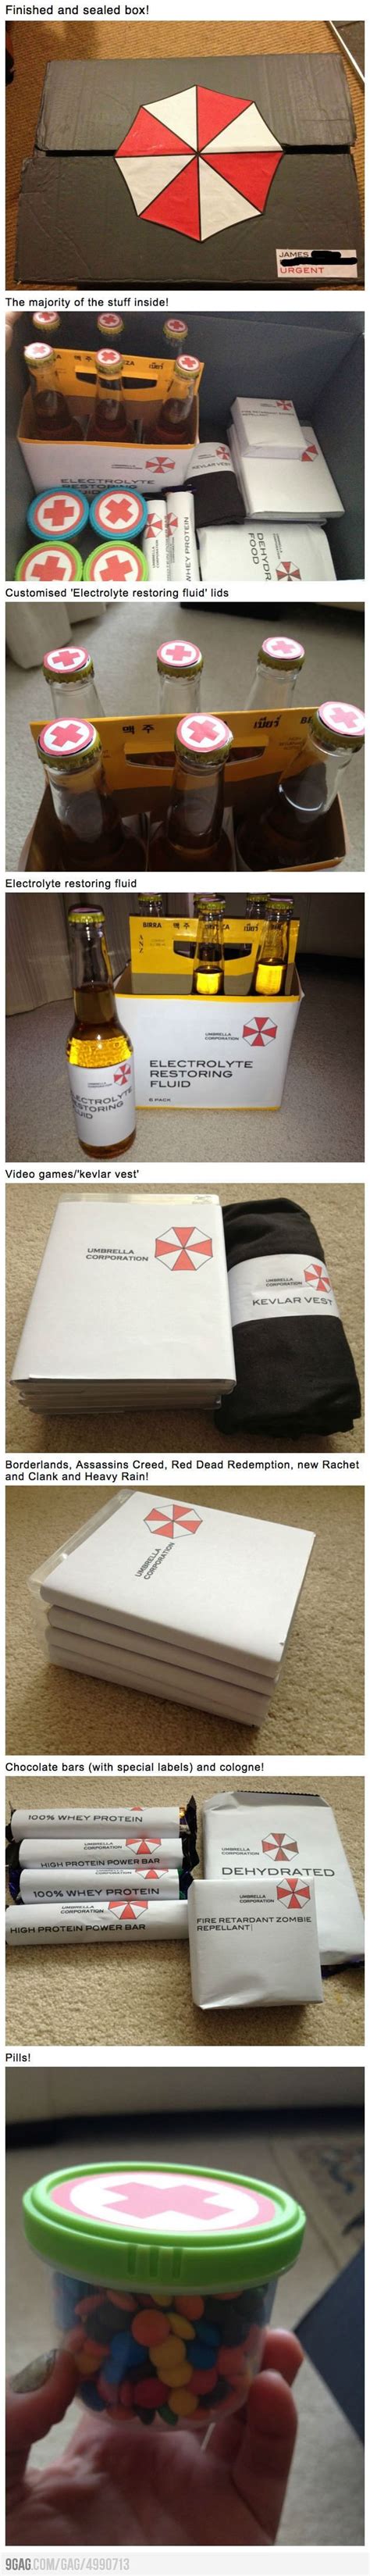 I made this as a gift for a friend for her birthday! Resident Evil Inspired Zombie Survival Kit | Zombie survival kit, Diy gifts for boyfriend ...